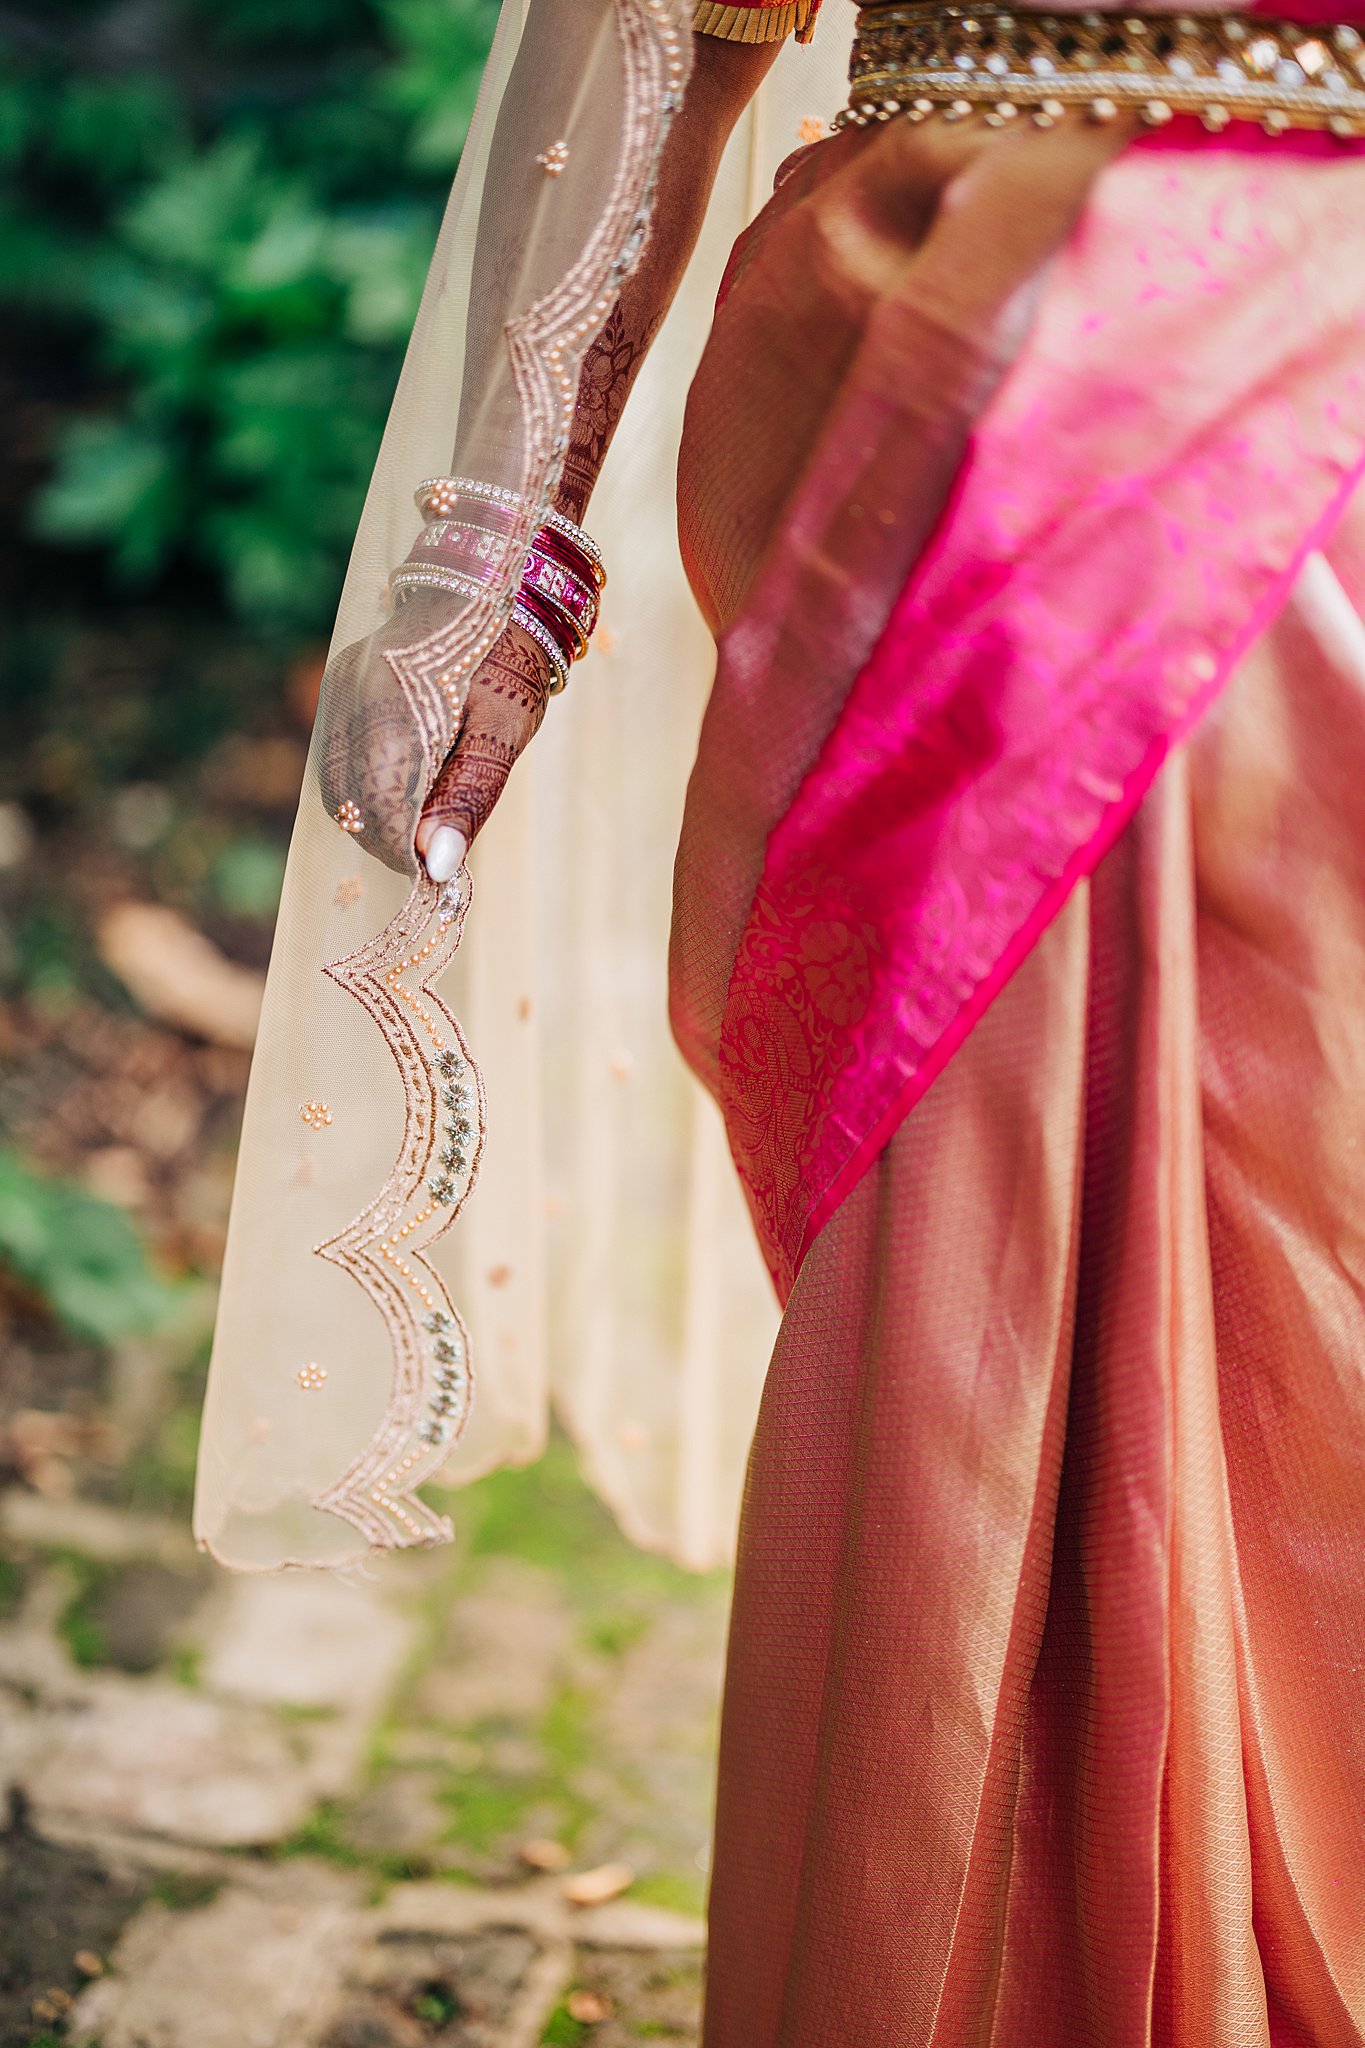 Details of a bride's henna covered hand holding her veil